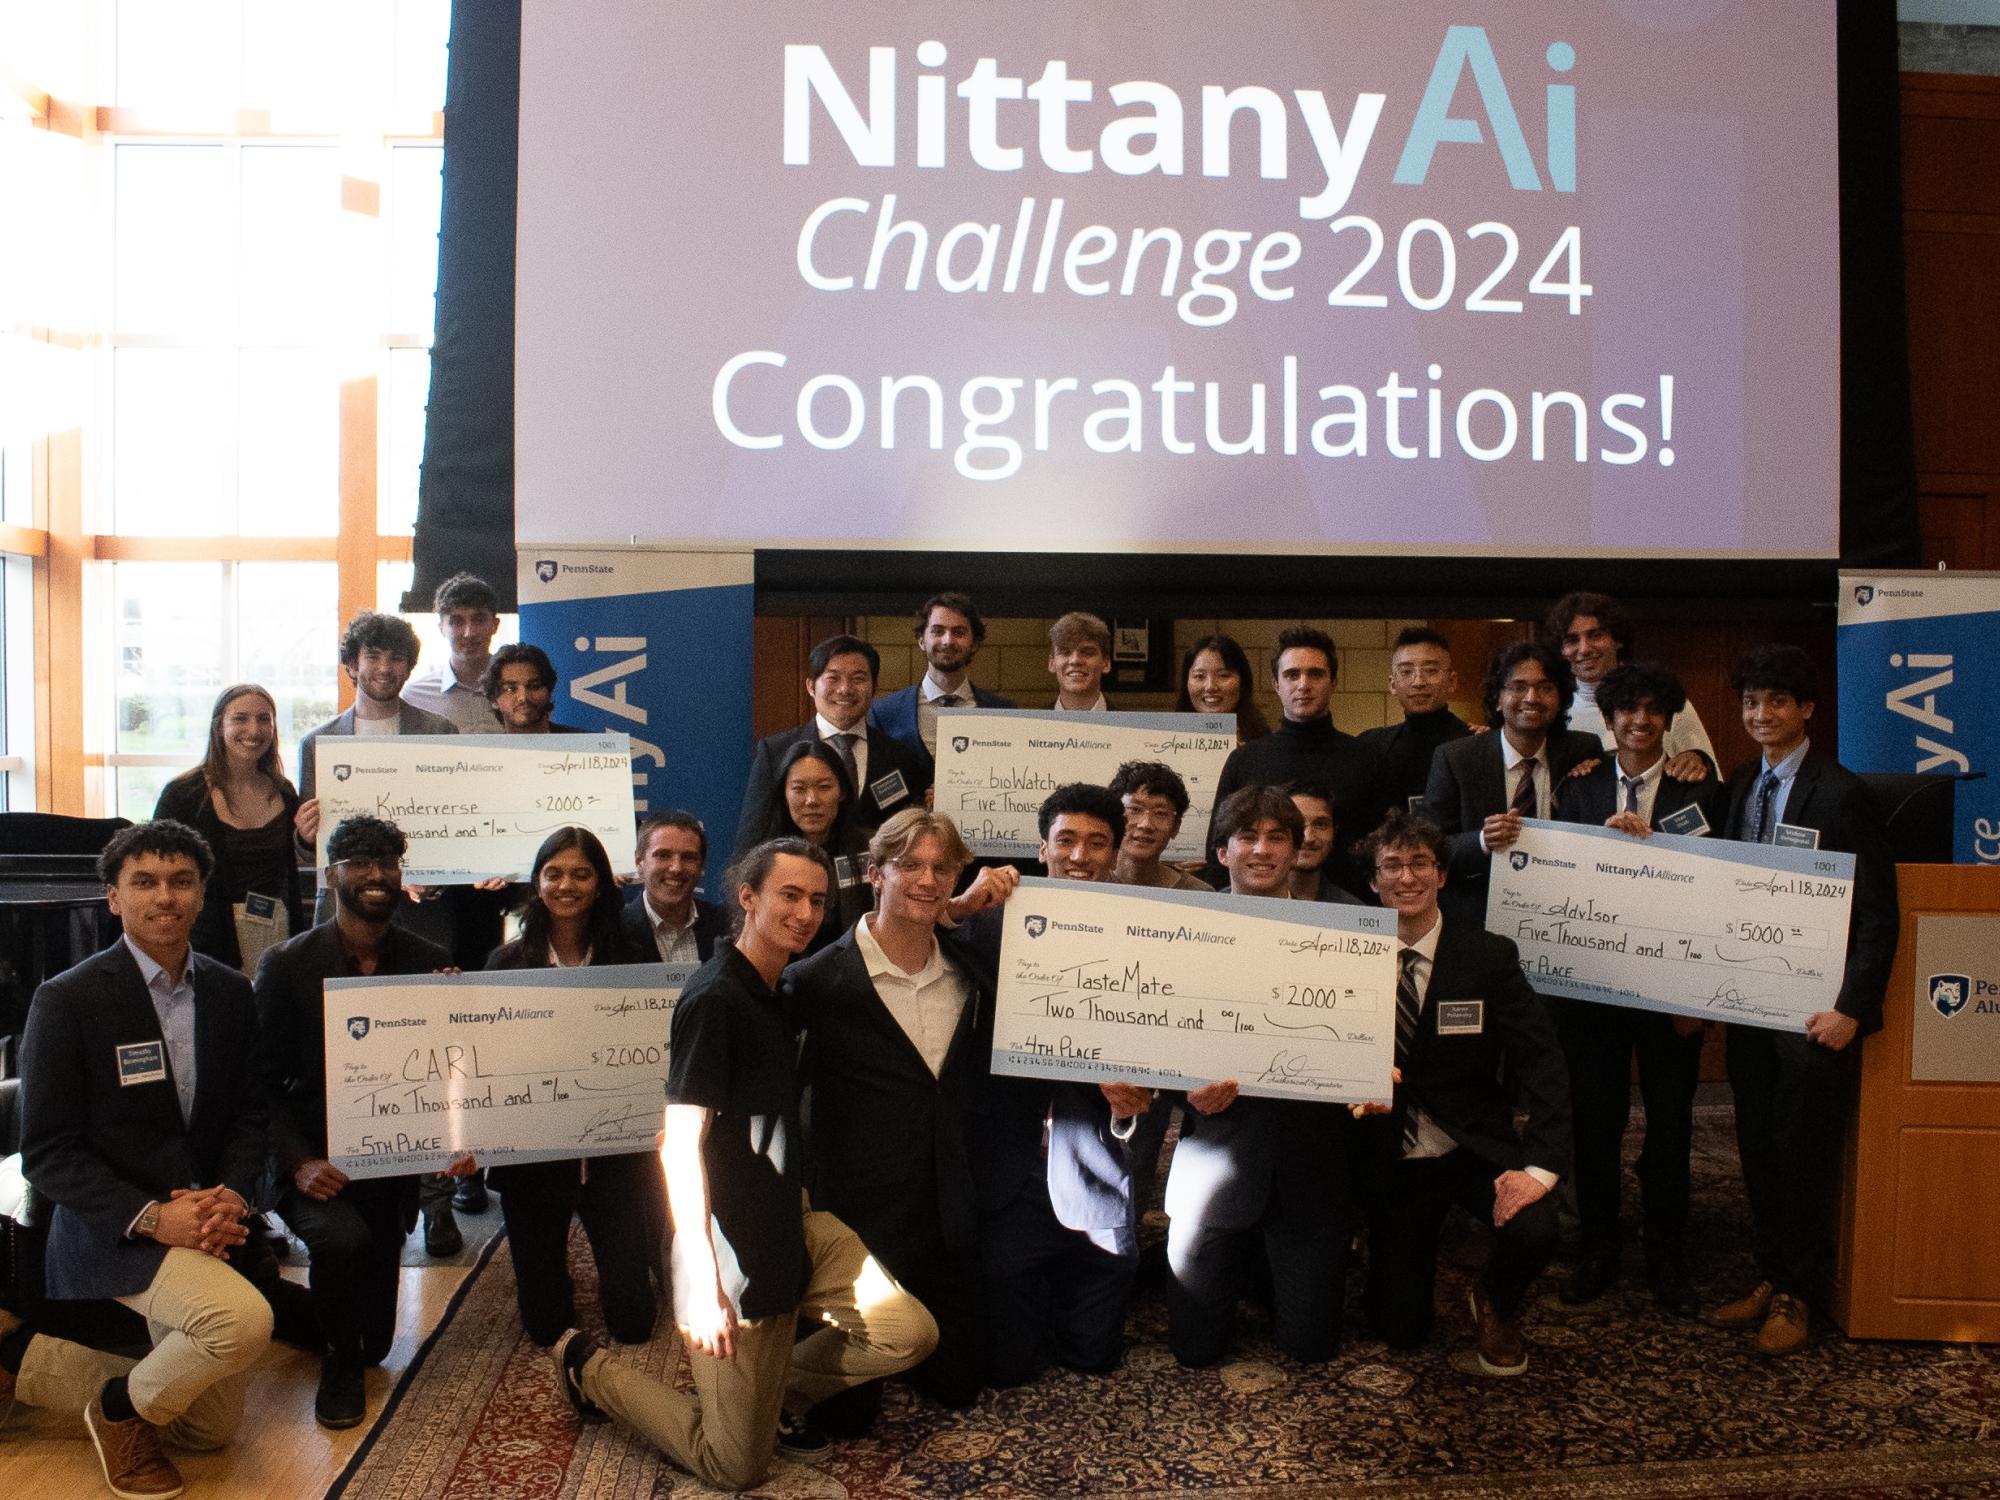 Students using AI for good win $17,000 in Nittany AI Challenge 